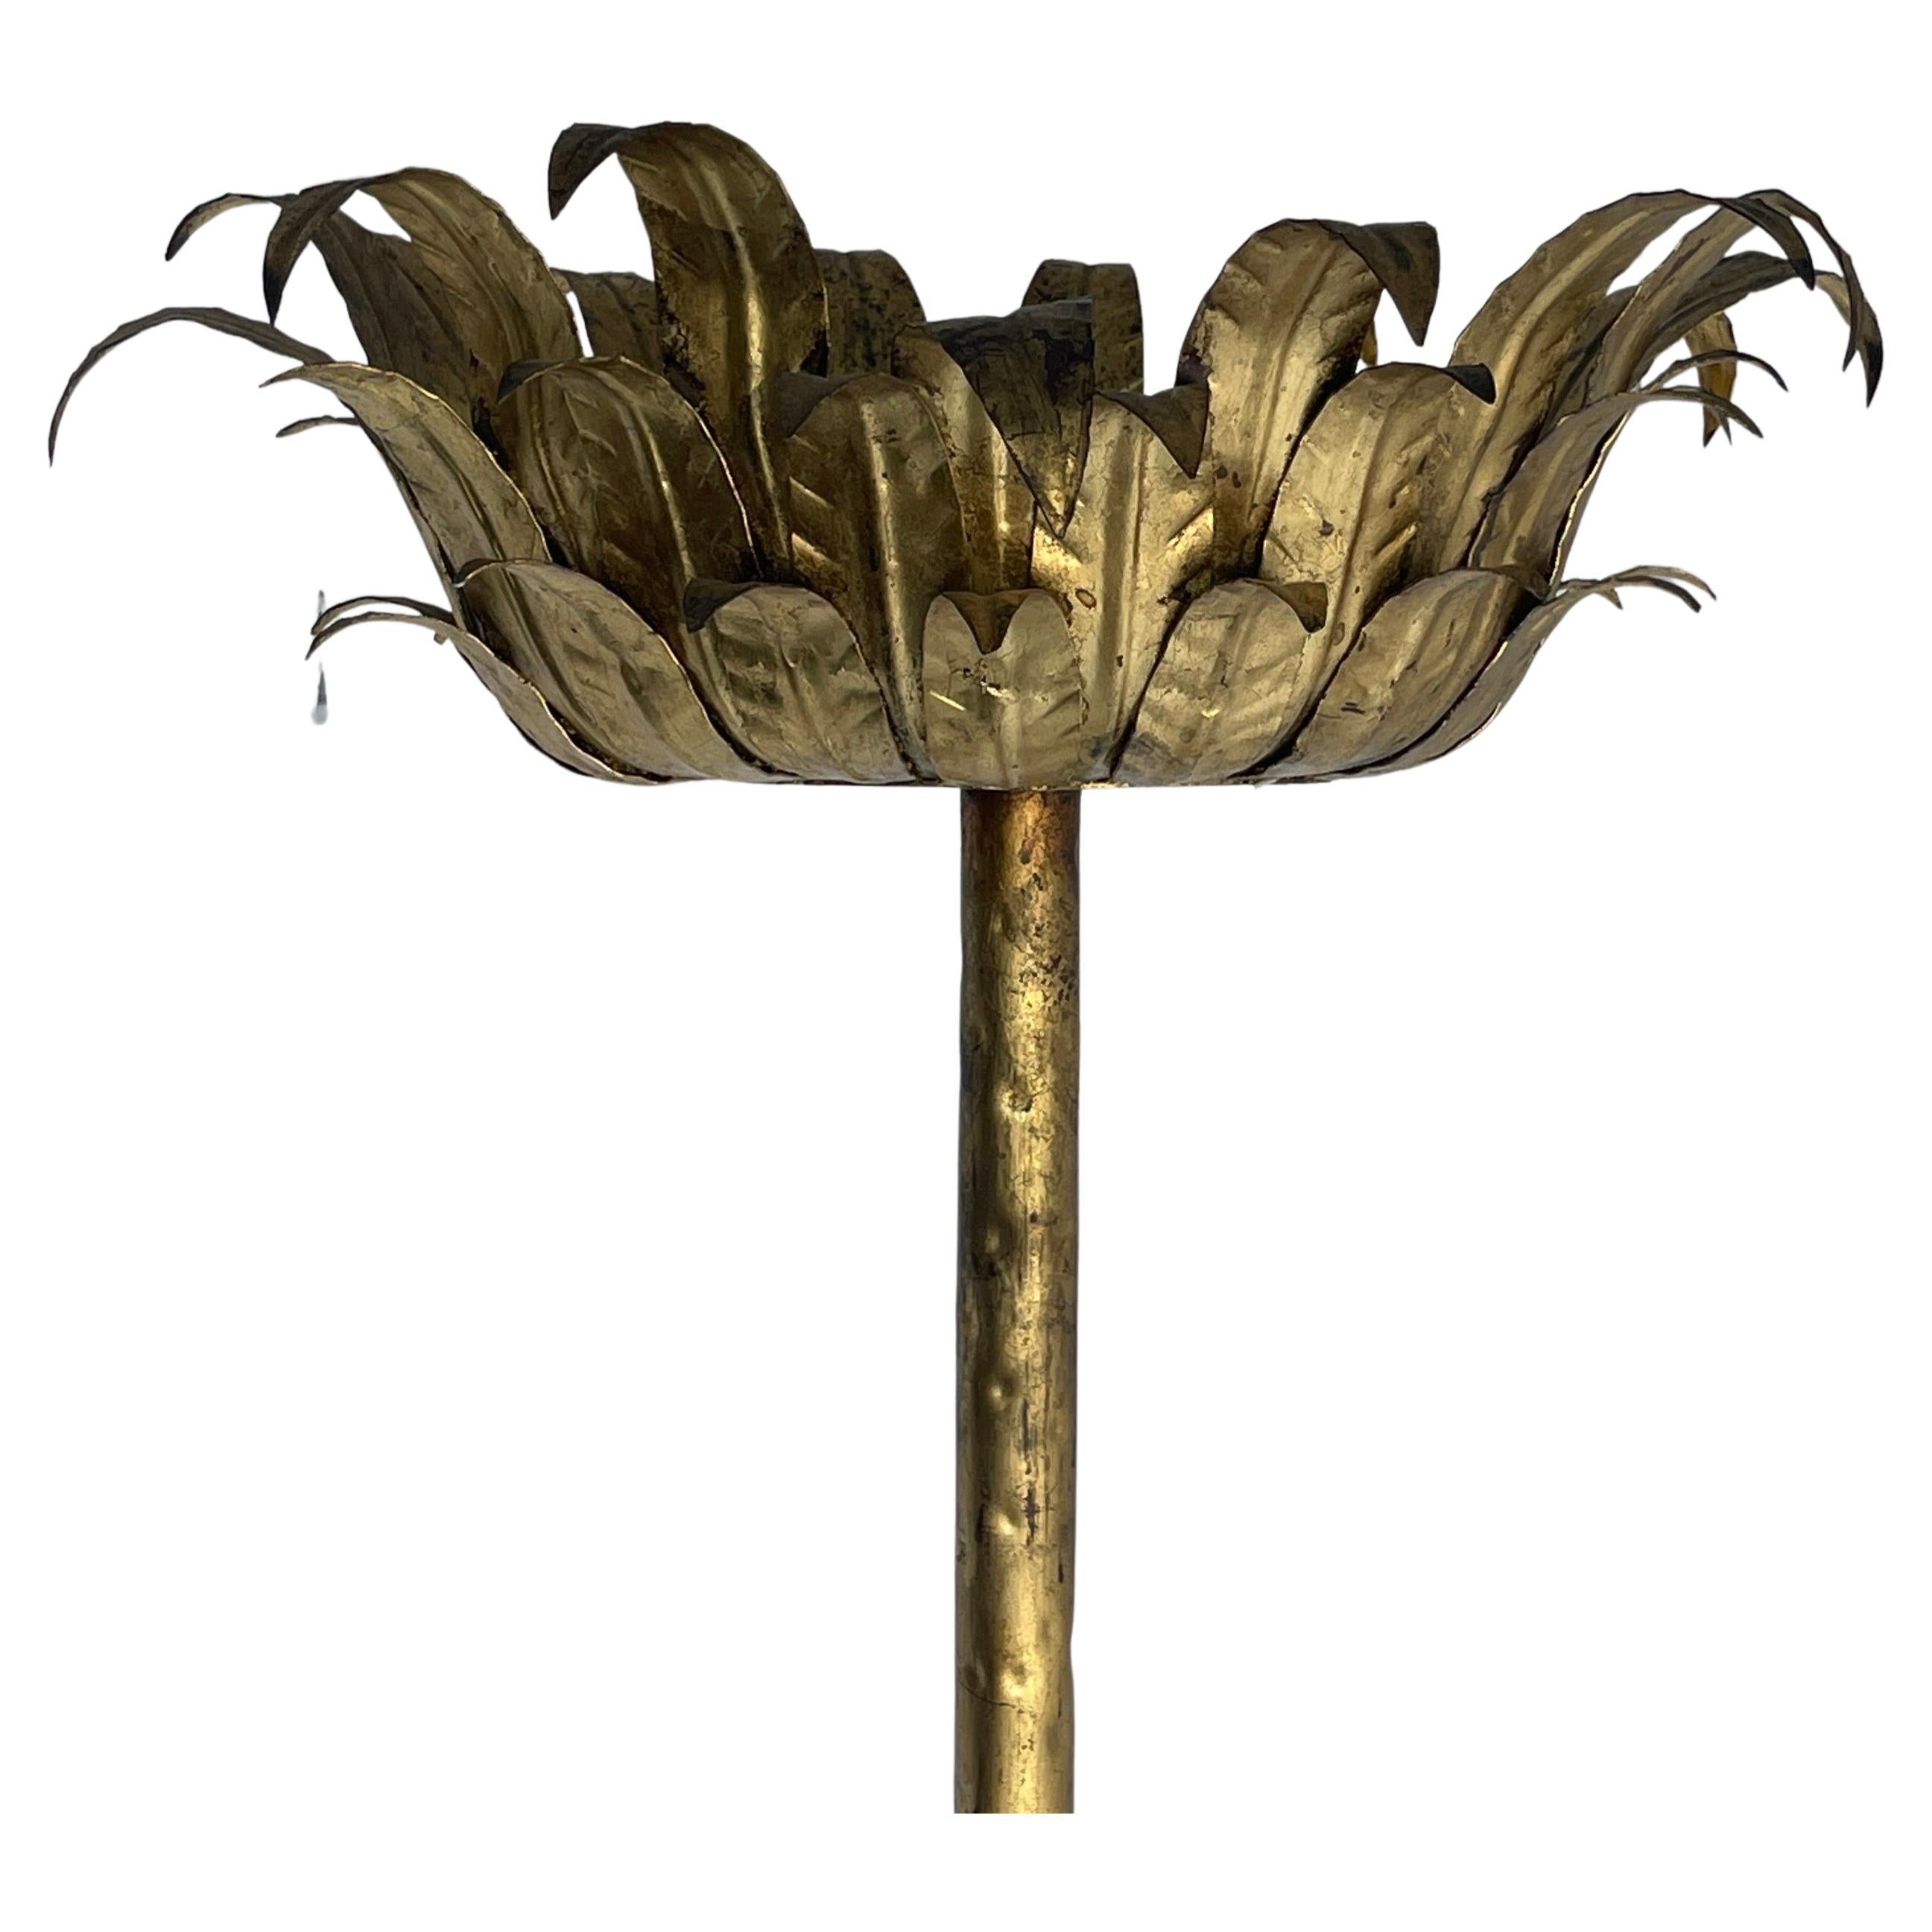 Tall Spanish Gilt Gold Textured Torchiere Tole Plant Stand

A beautiful, tall antiqued gold tole standing floral planter hand-crafted in Spain. The very sturdy iron tripod arch base features a hammered and textured finish. This piece would be a